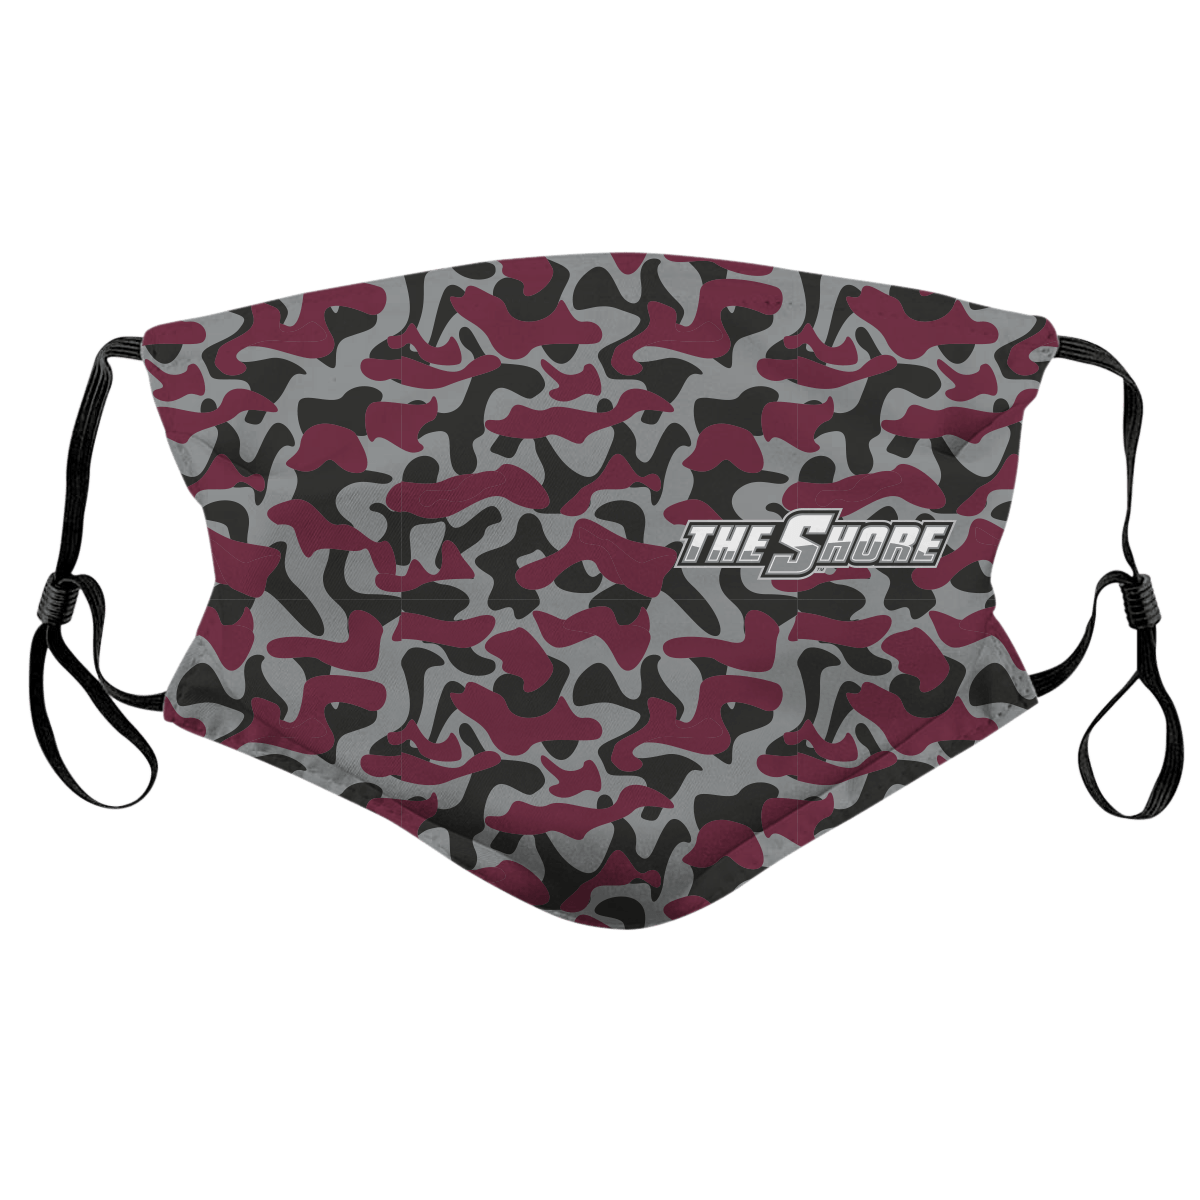 UMES Camo The Shore / Face Mask - Route One Apparel